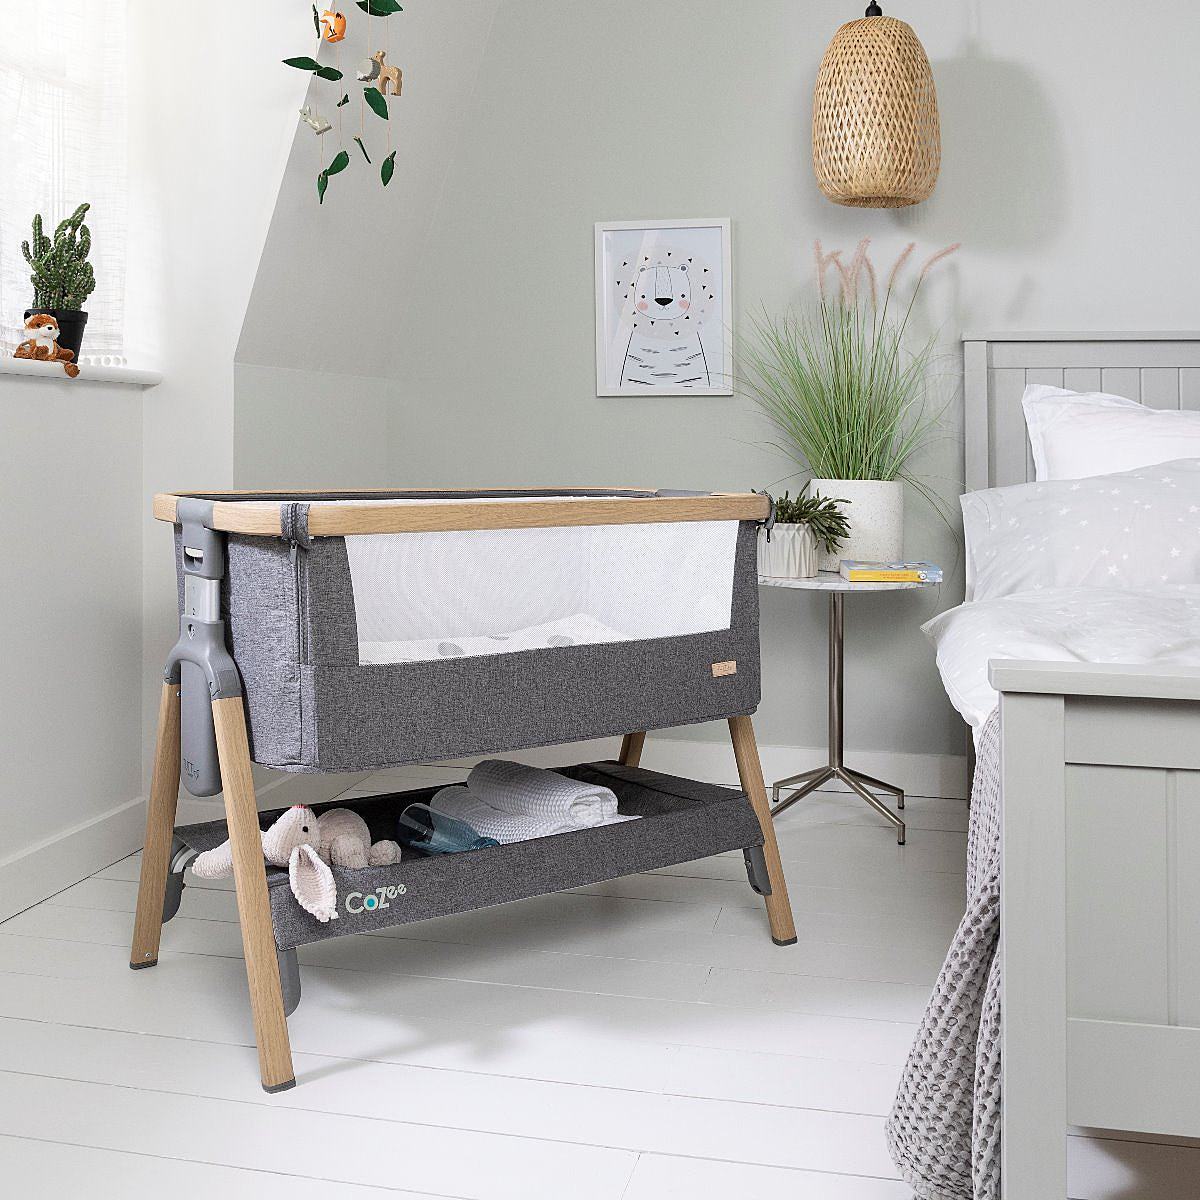 Atletisch Meander Vroegst CoZee Bedside Crib Oak and Charcoal - Tutti Bambini